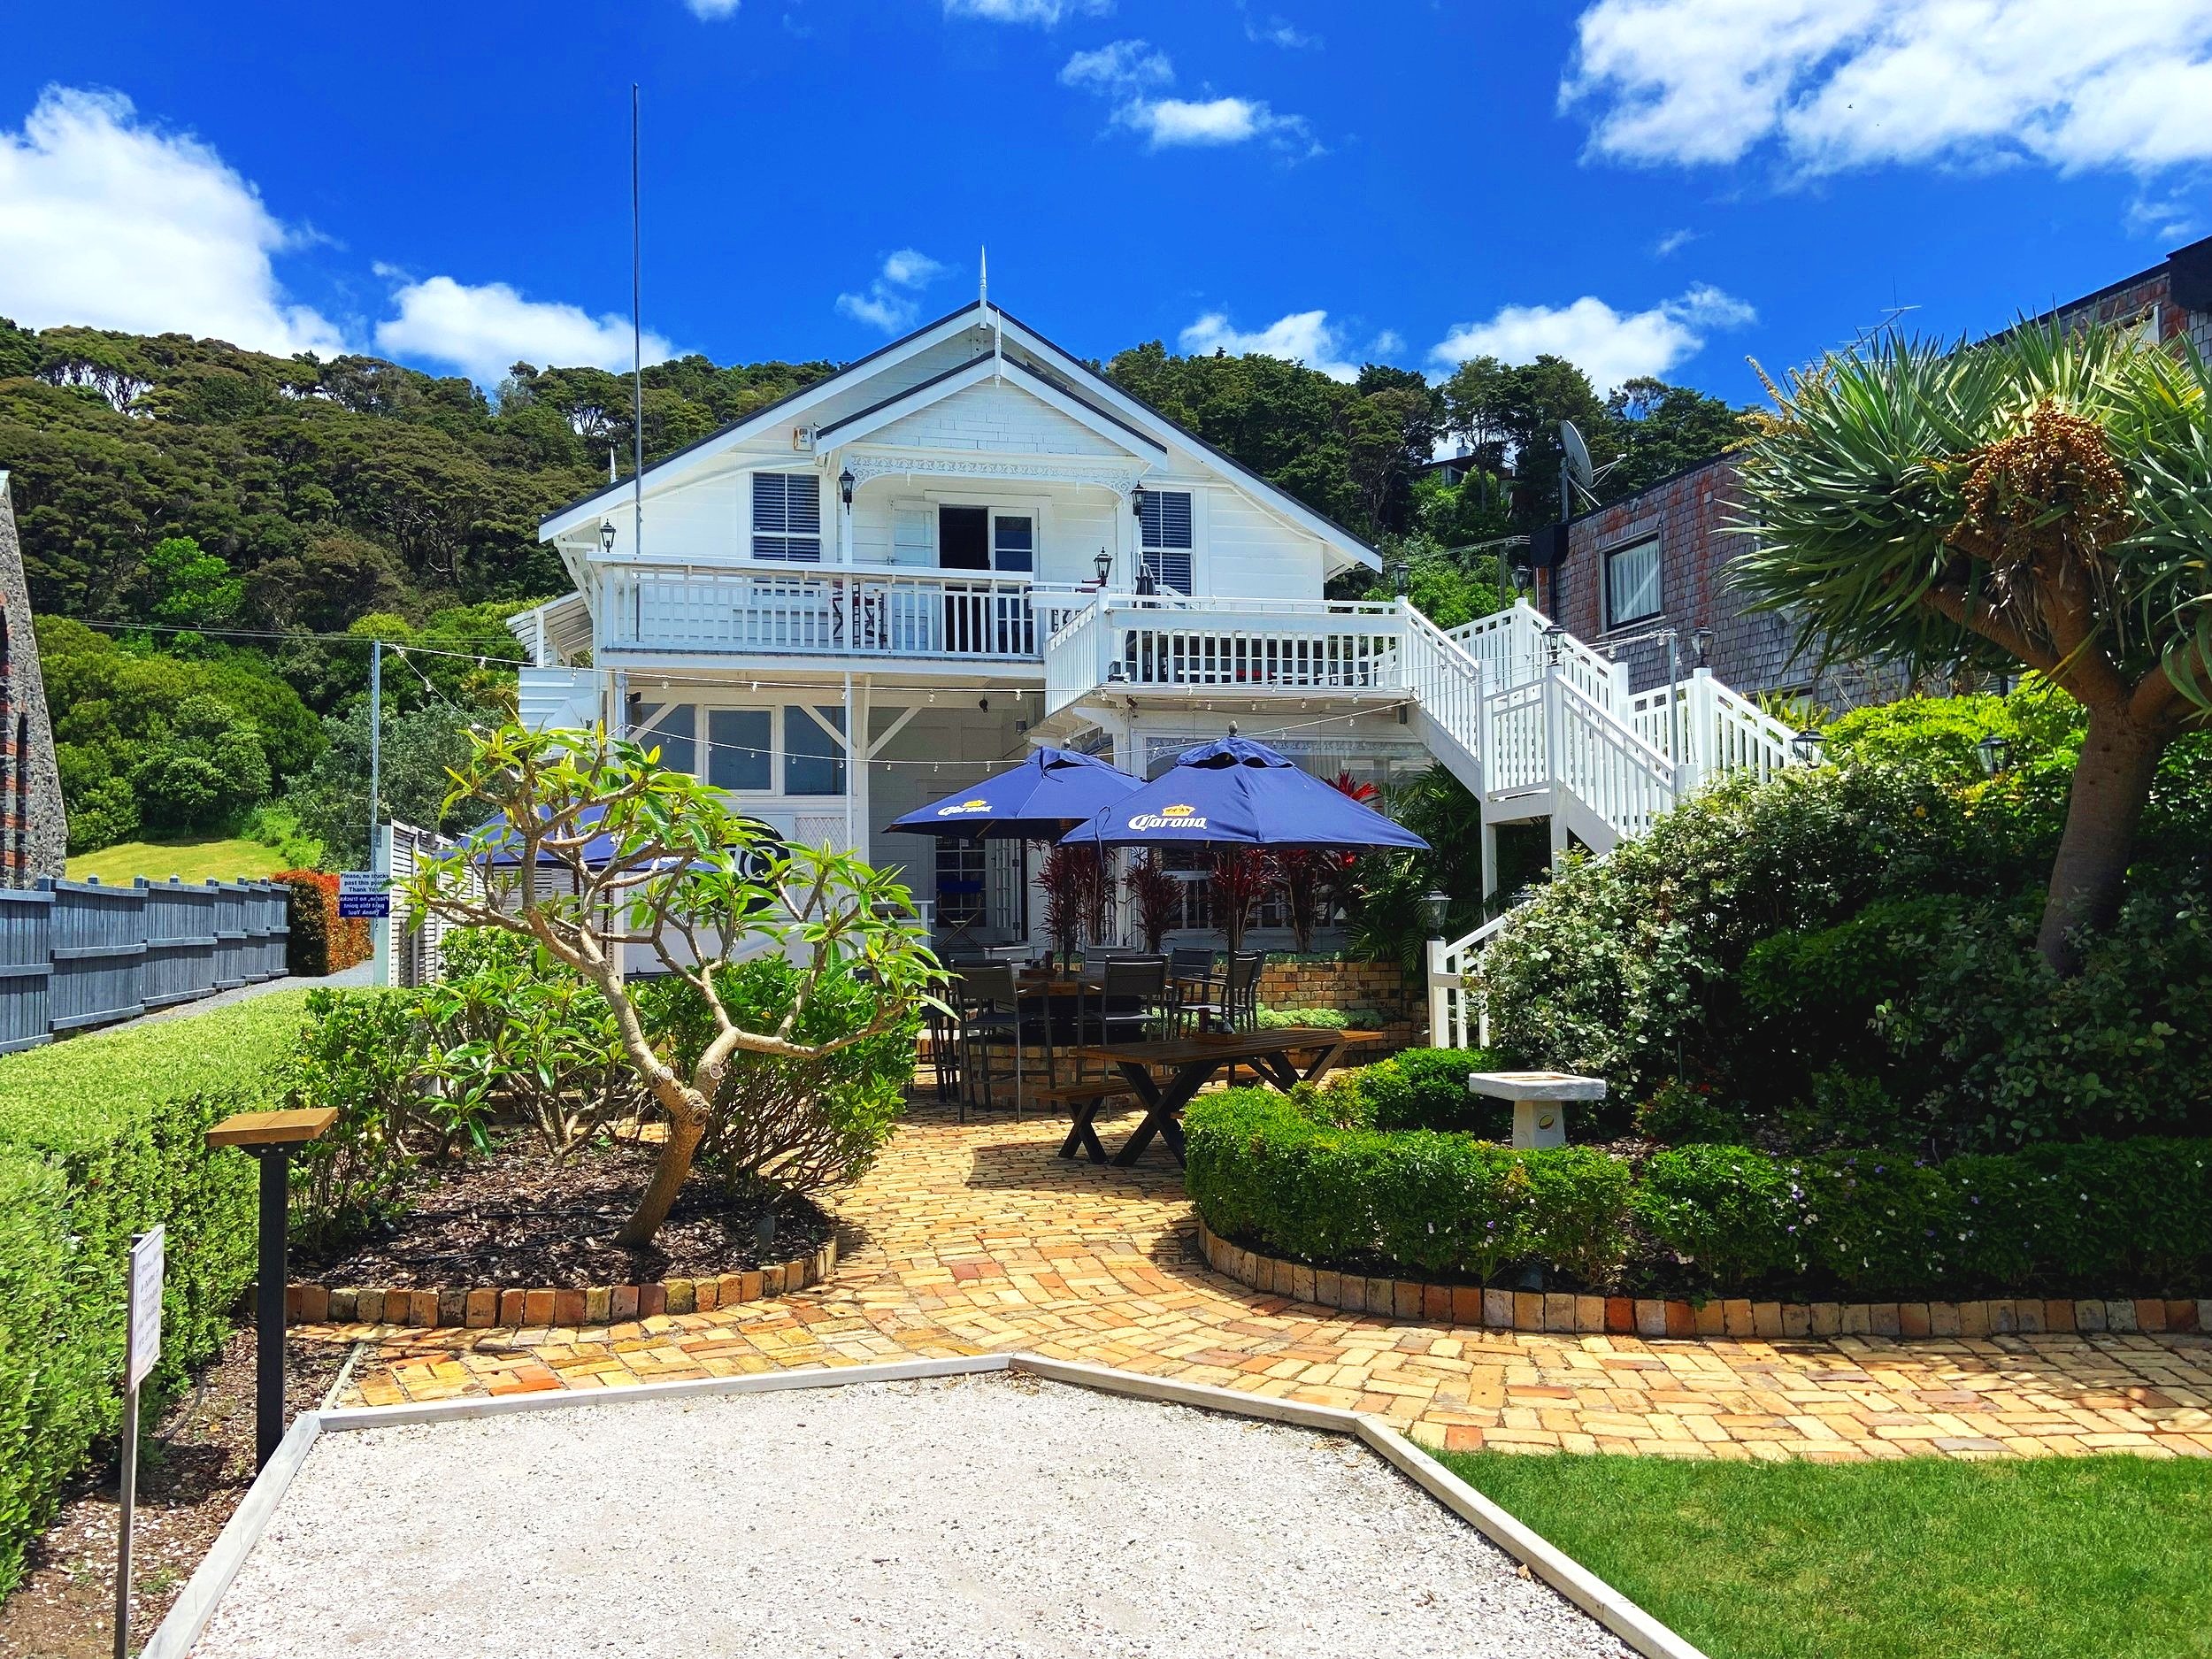 Arguably the best outdoor dining in Paihia